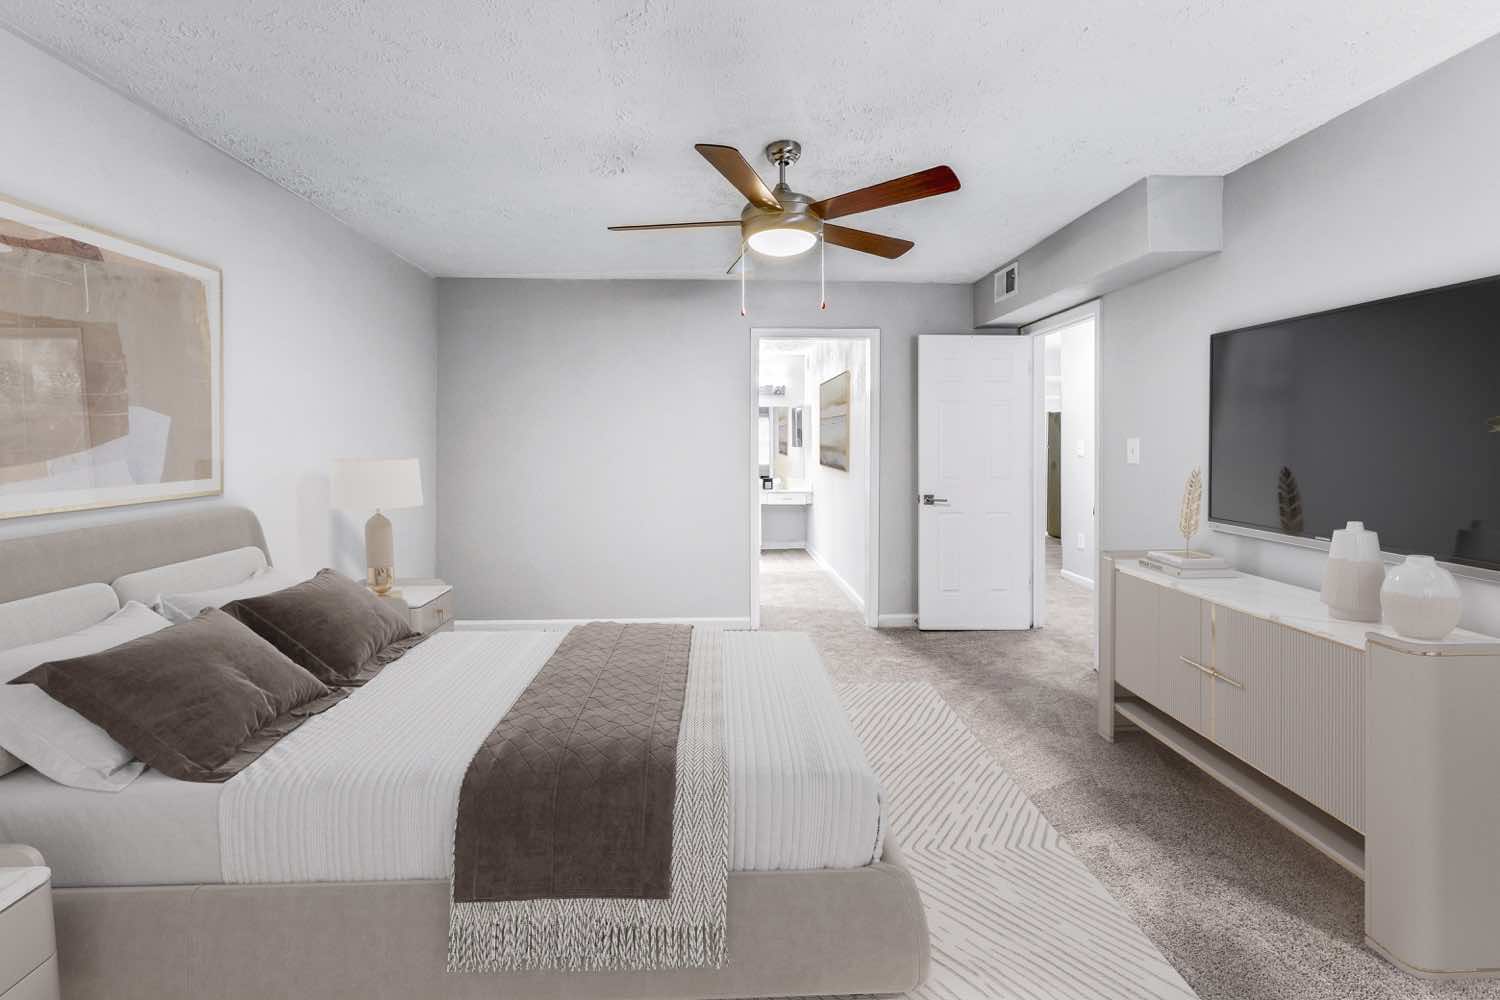 model bedroom with plush carpeting and ceiling fan